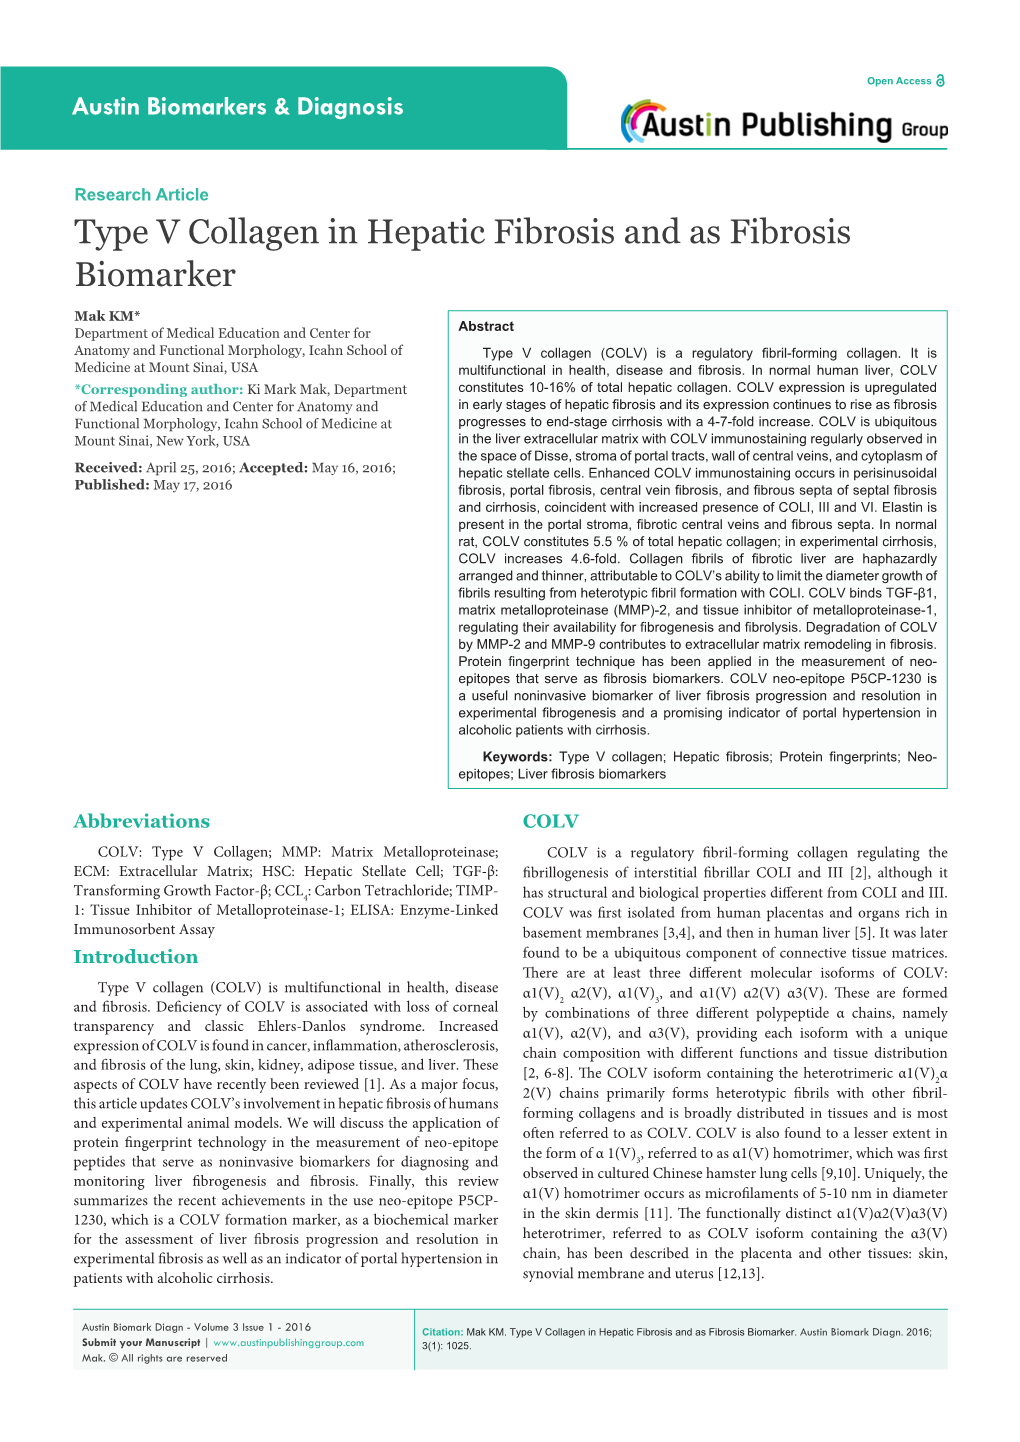 Type V Collagen in Hepatic Fibrosis and As Fibrosis Biomarker